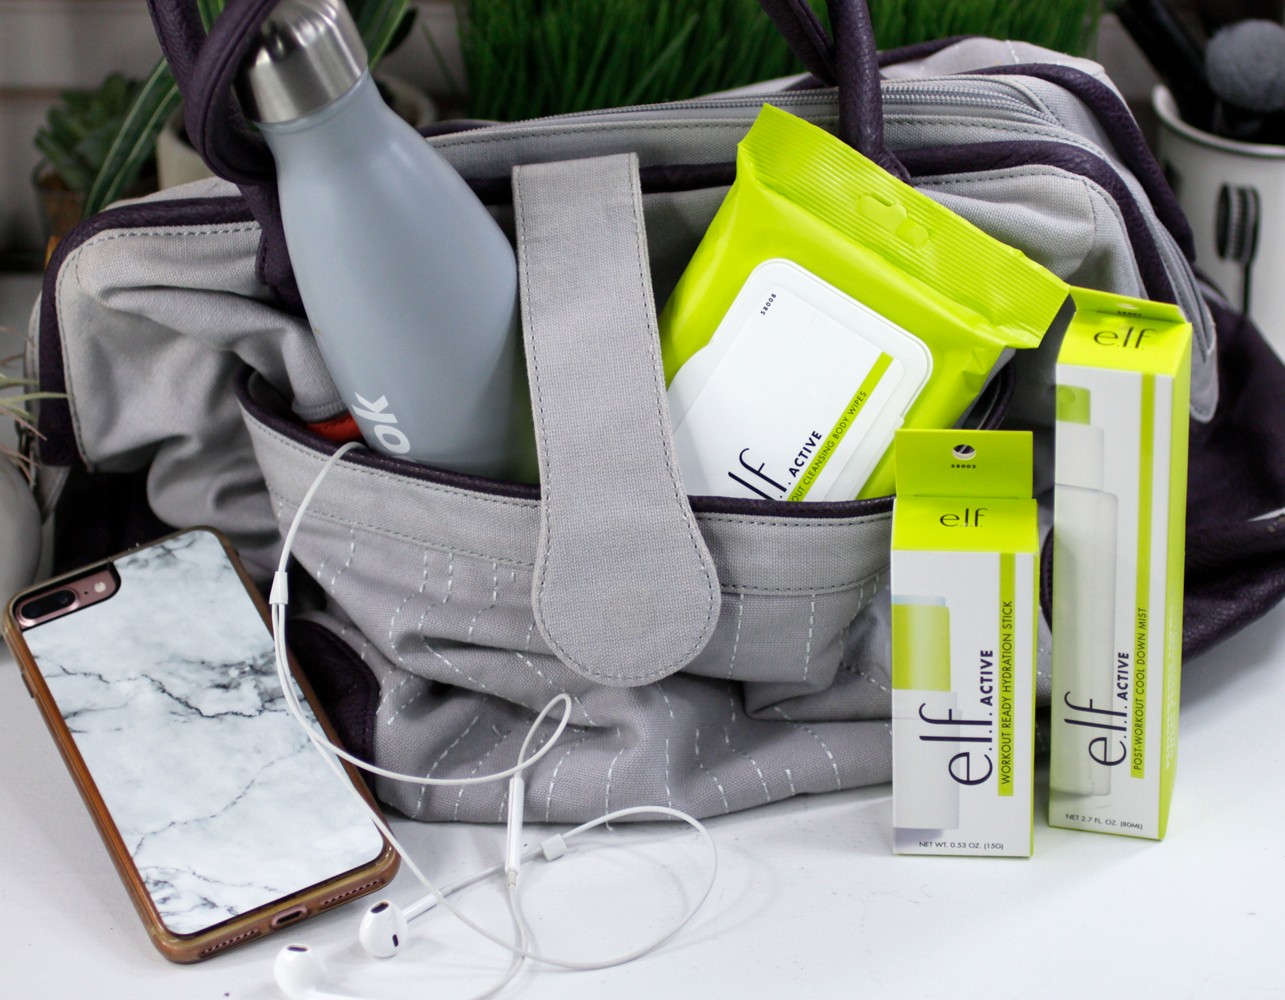 Elf Active Skincare and Makeup for the Gym